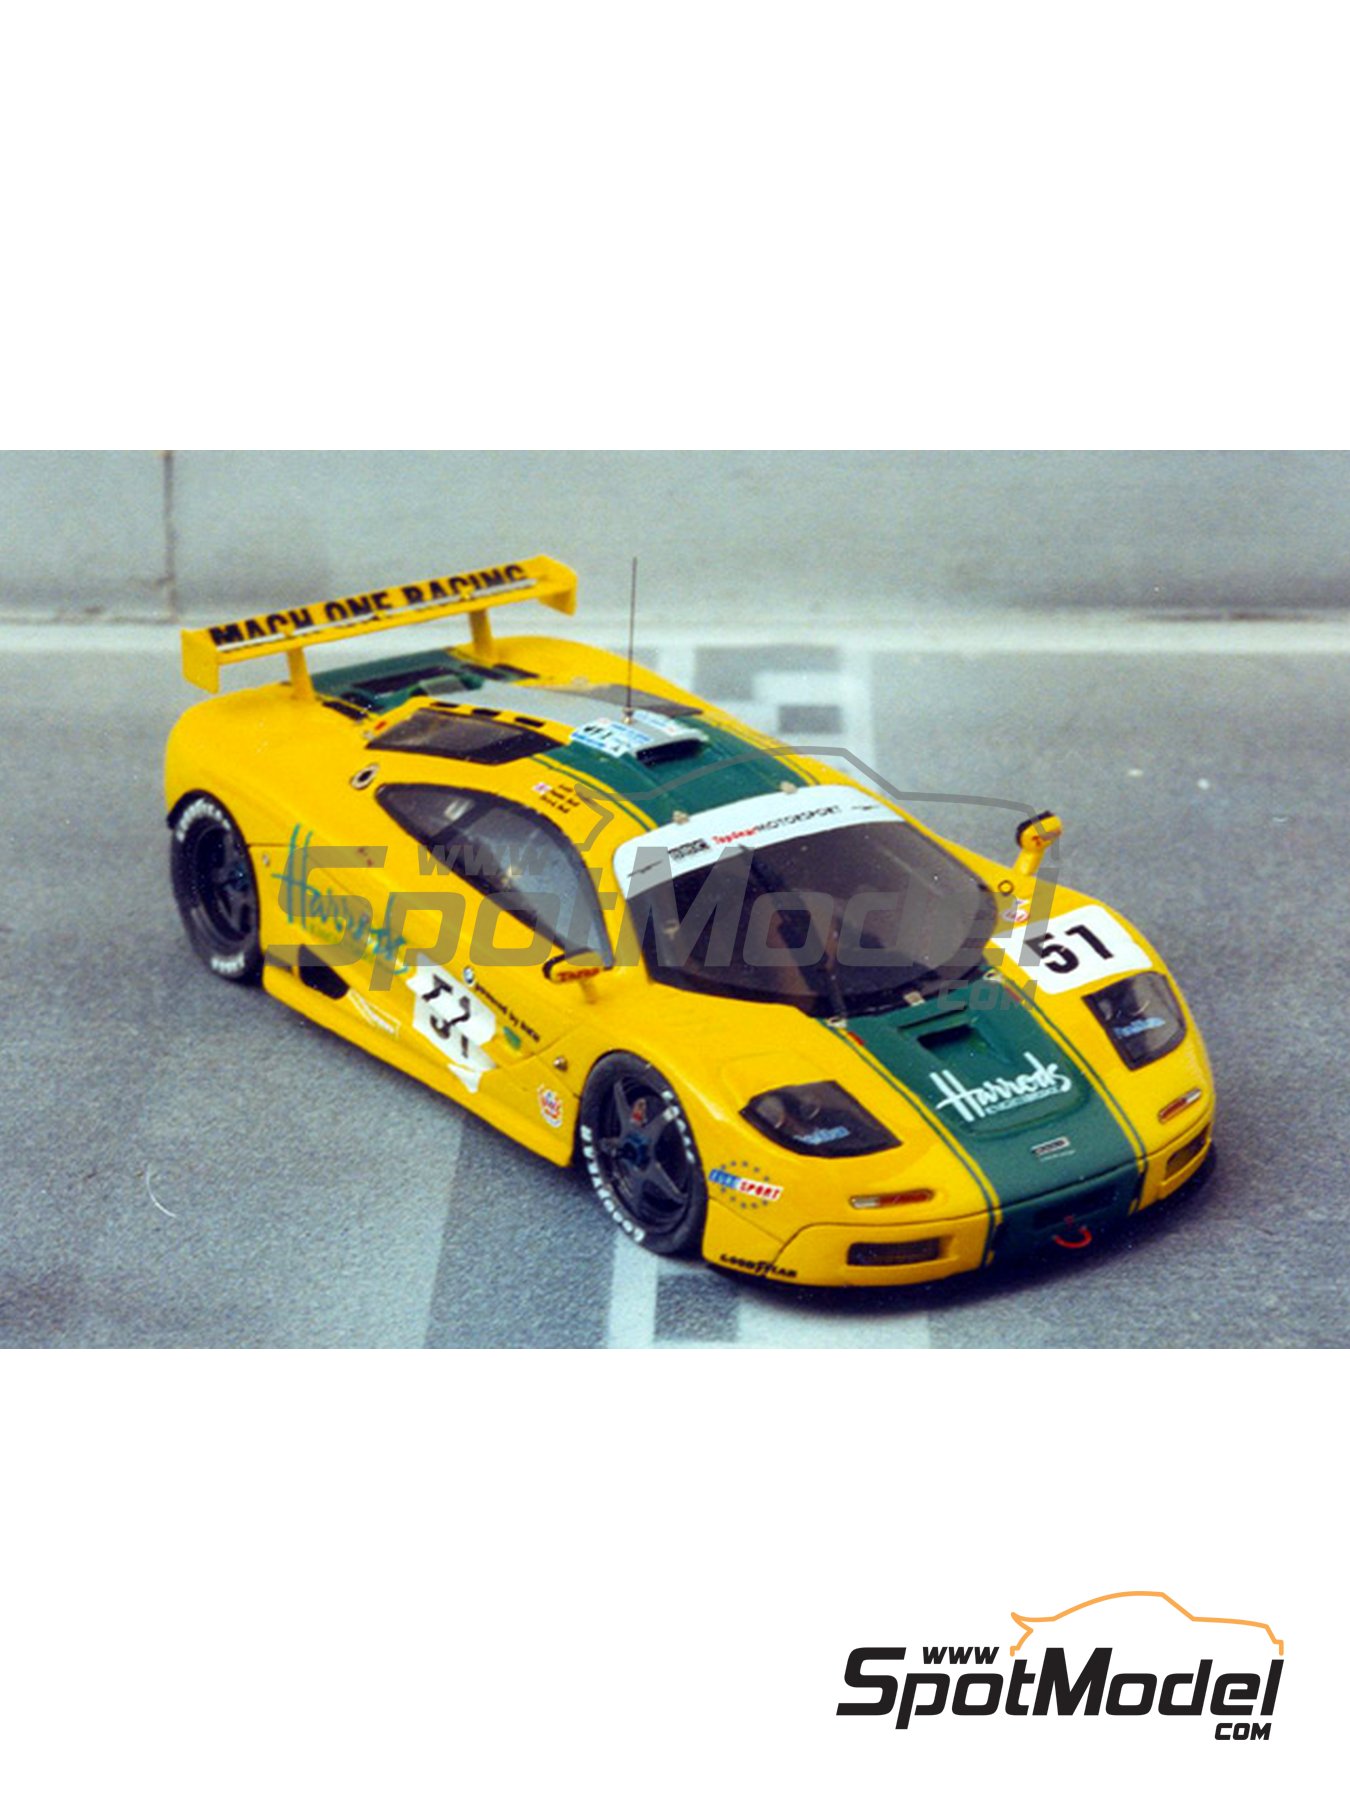 McLaren F1 GTR sponsored by Harrods - 24 Hours Le Mans 1995. Car scale  model kit in 1/43 scale manufactured by Renaissance Models (ref. 021C)